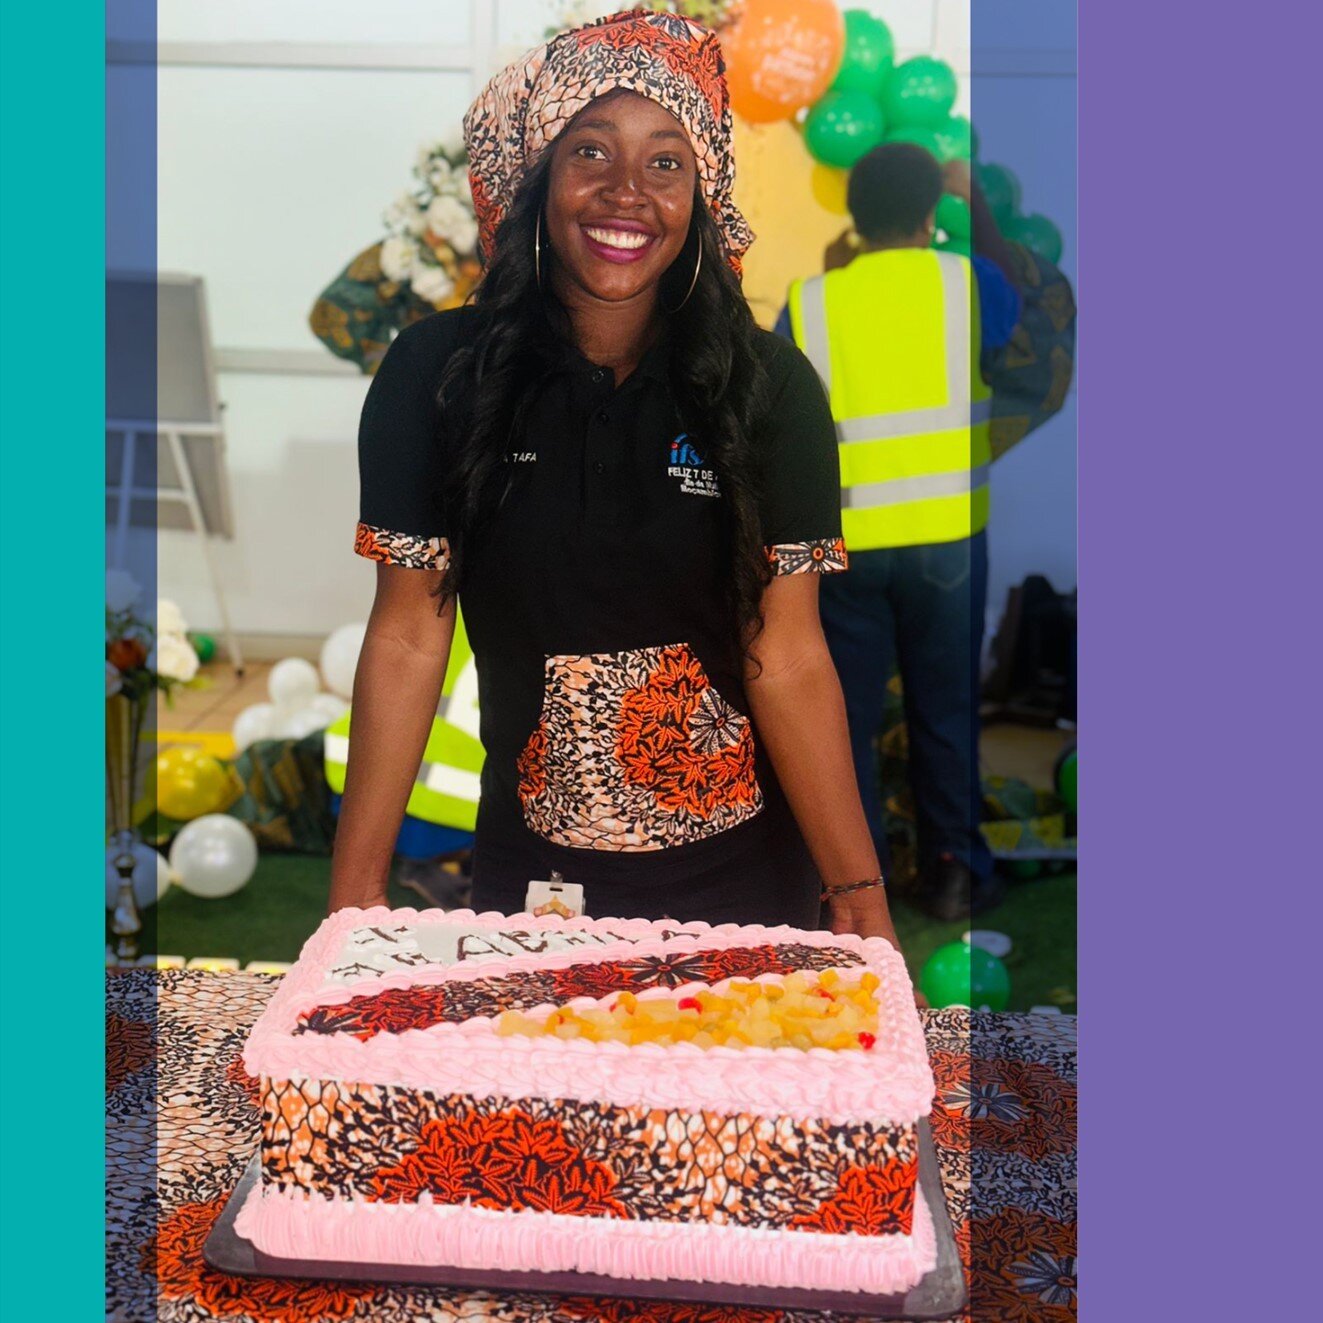 &ldquo;There is no limit to what we, as women, can accomplish.&rdquo; &ndash; Michelle Obama
ㅤ
Our Mozambique sites celebrated our exceptional women employees and clients for Mozambique Women&rsquo;s Day.
ㅤ
#IFSAfrica #closertohome #mozambiquewomensd